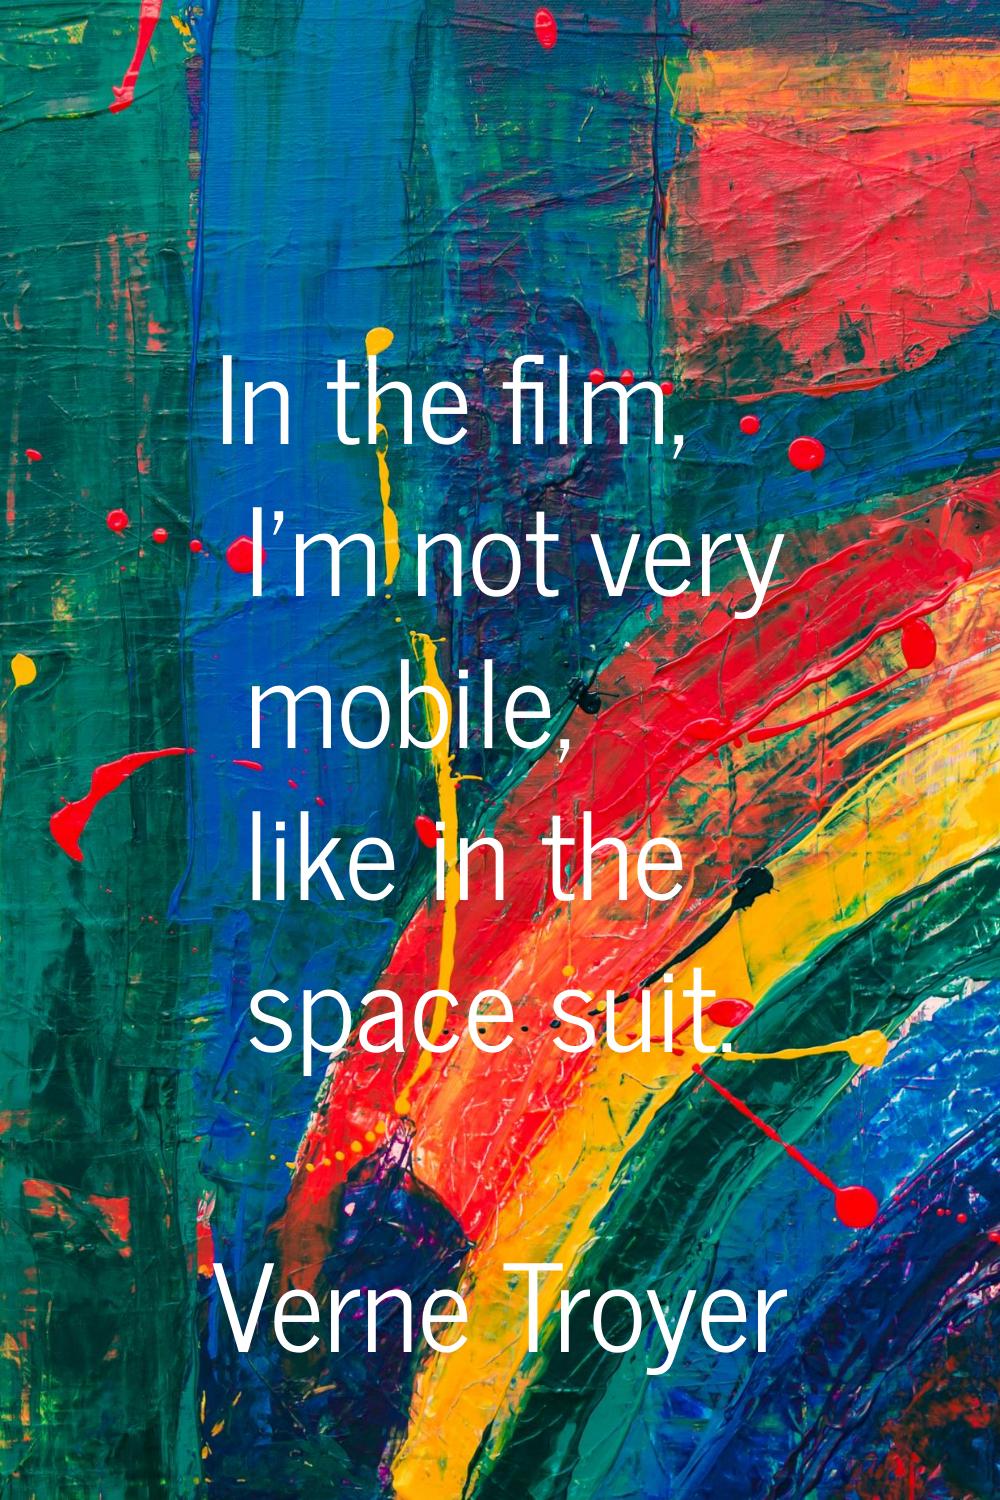 In the film, I'm not very mobile, like in the space suit.